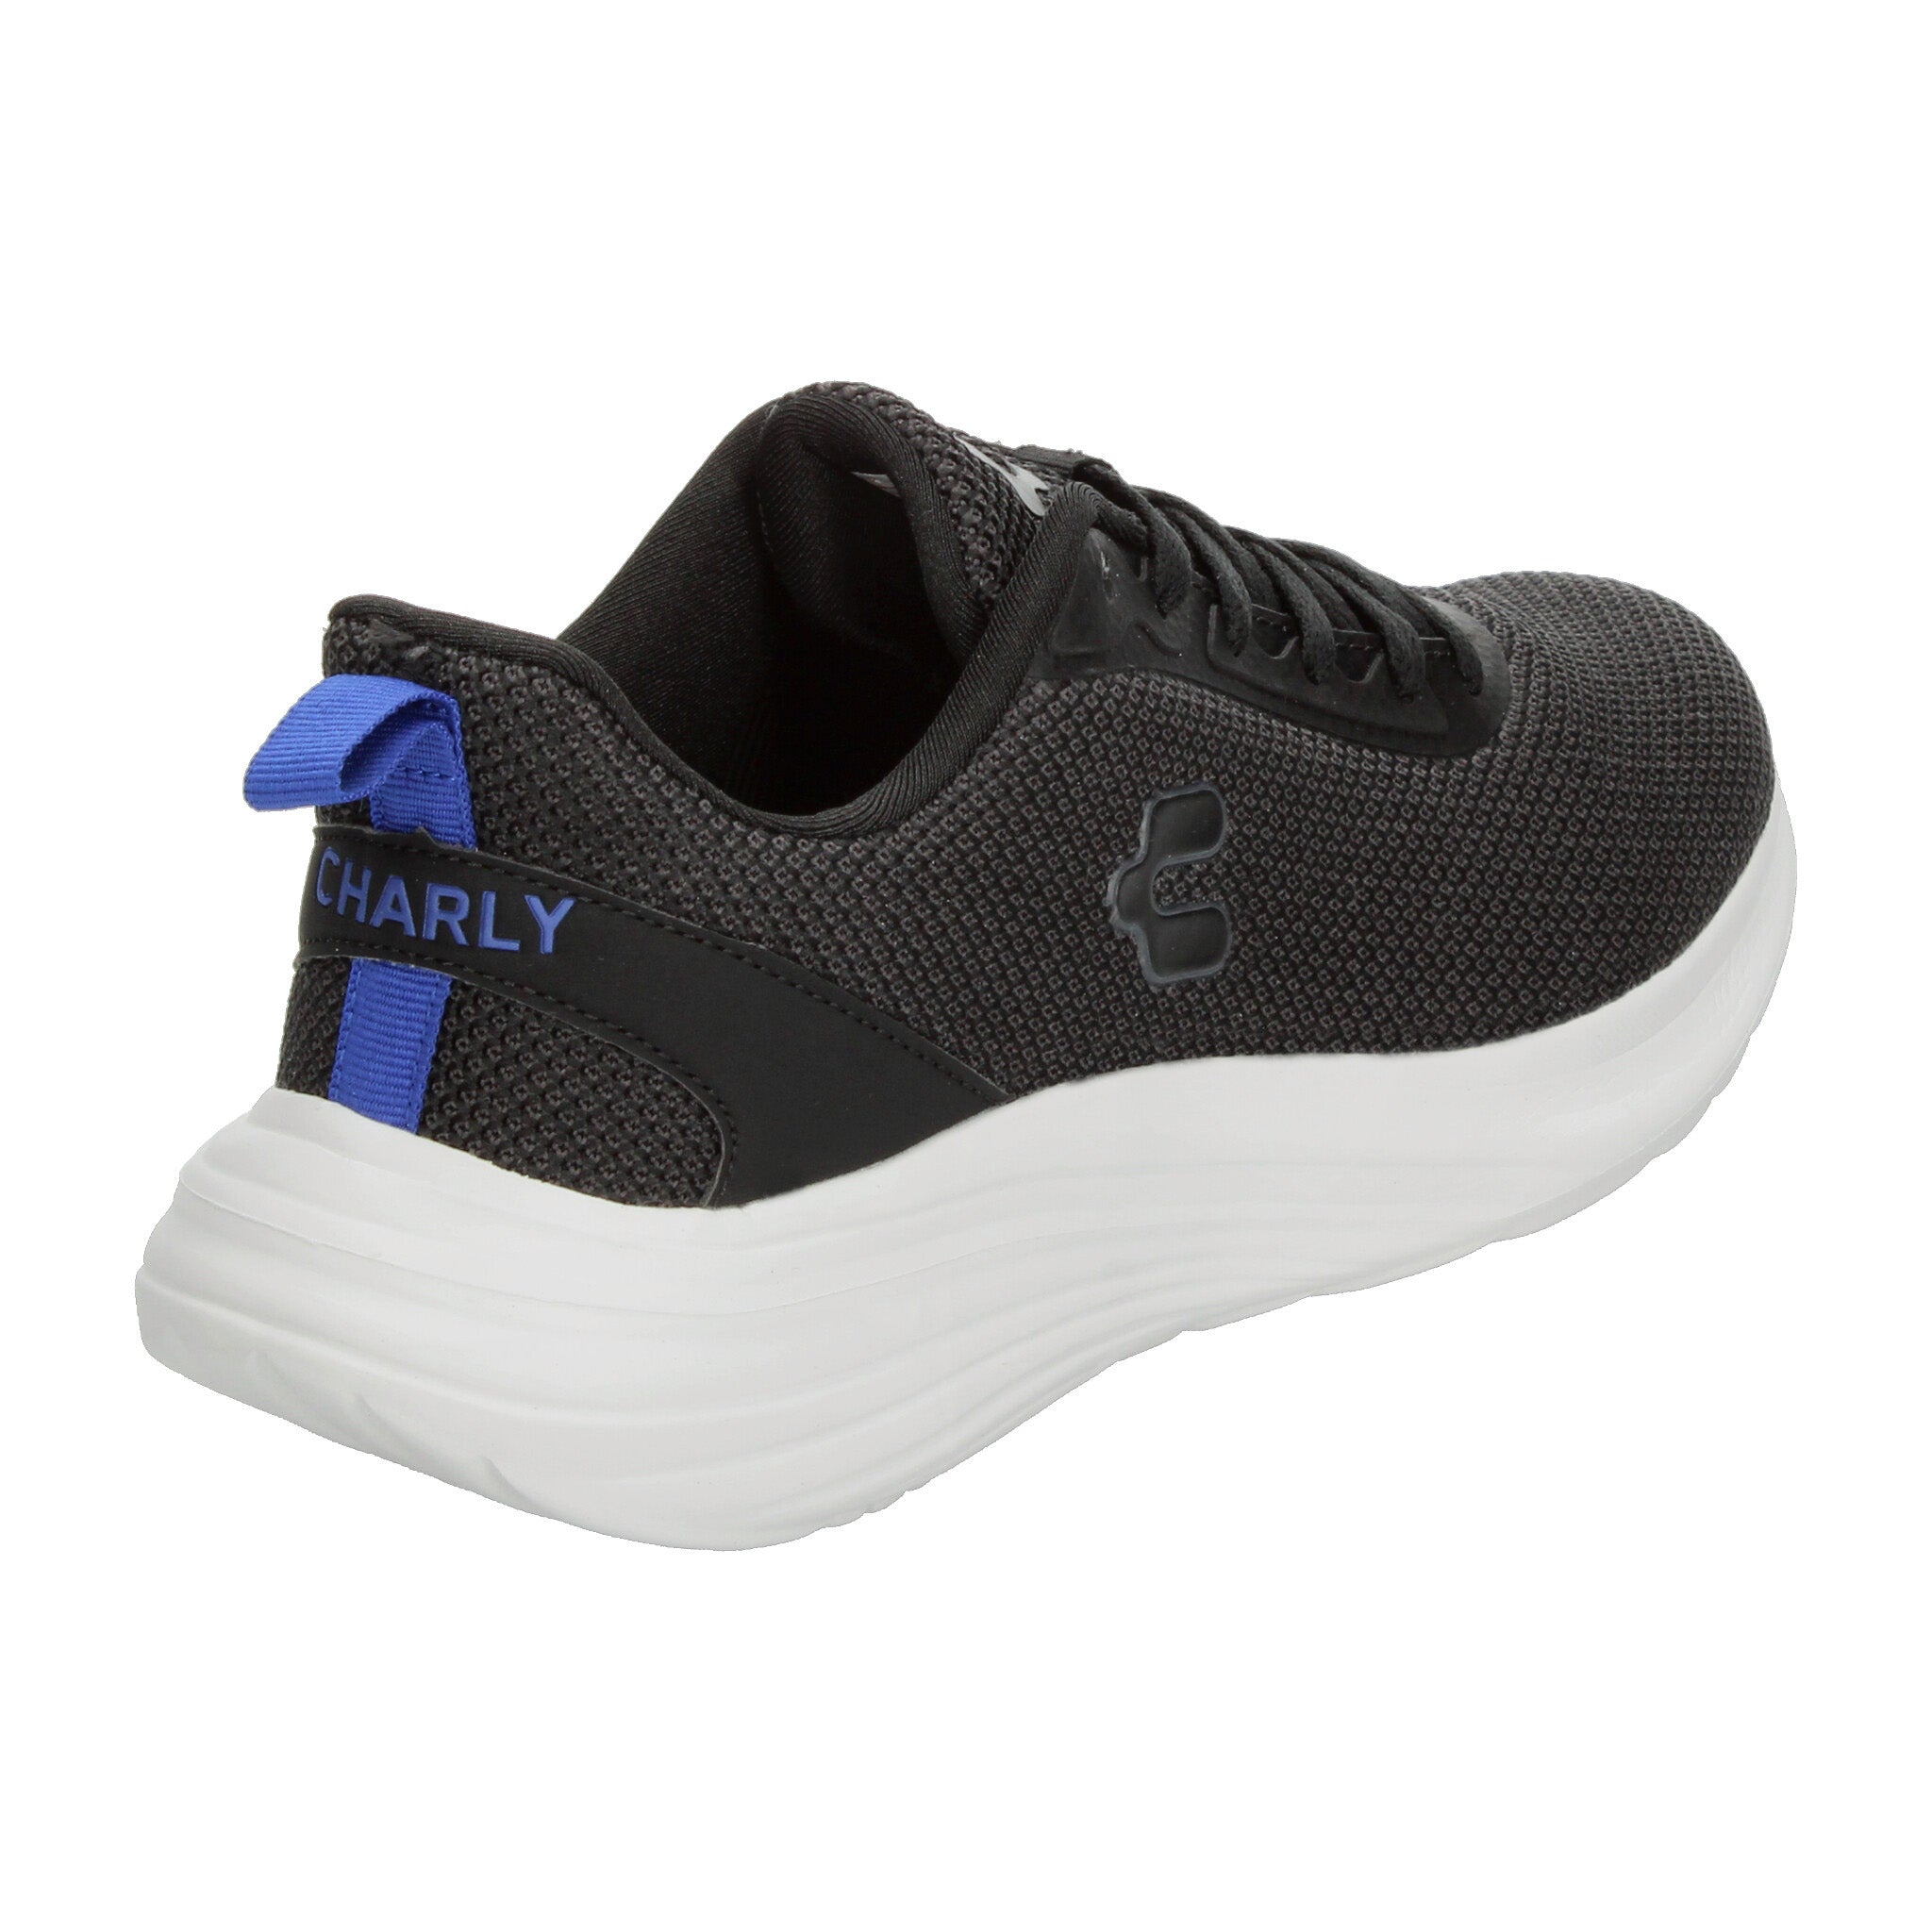 Tenis Charly Negro para Hombre [CHY3473] CHARLY 